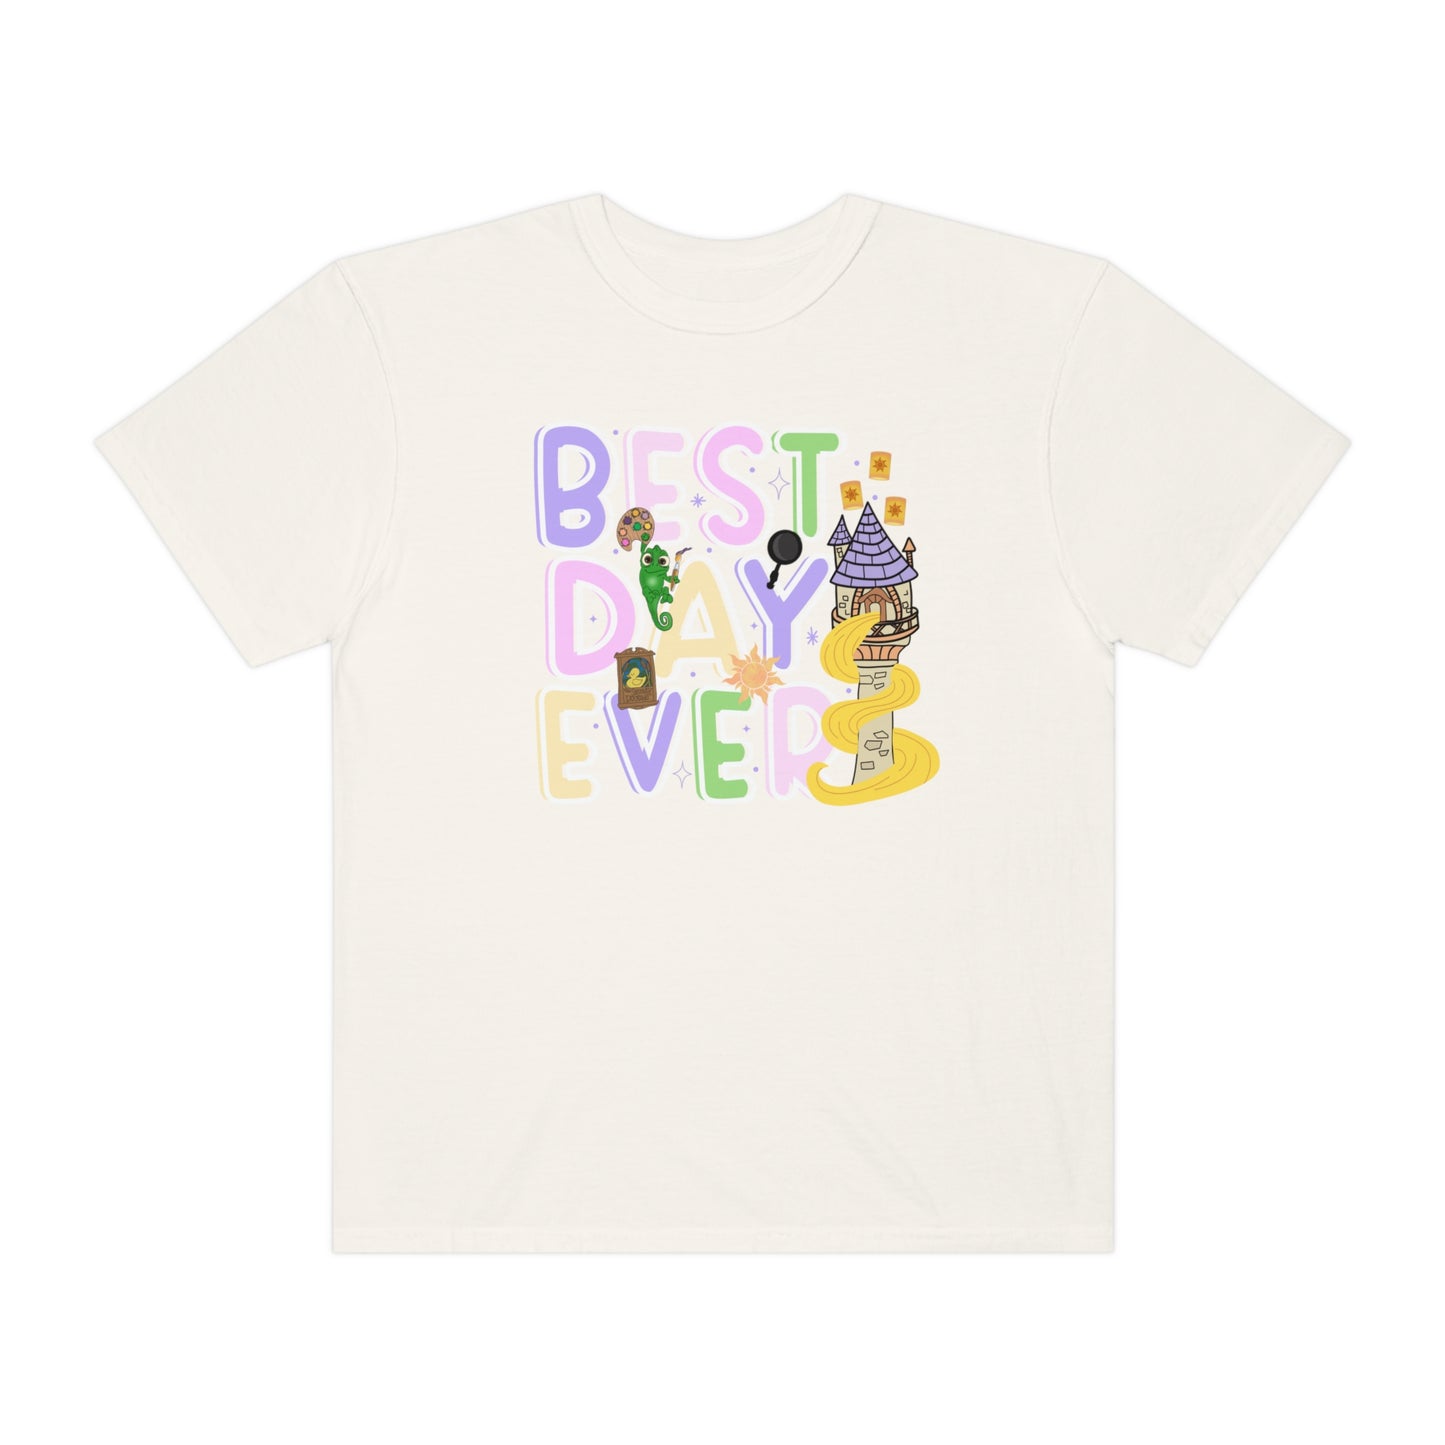 Best Day Ever Adult Unisex Tee